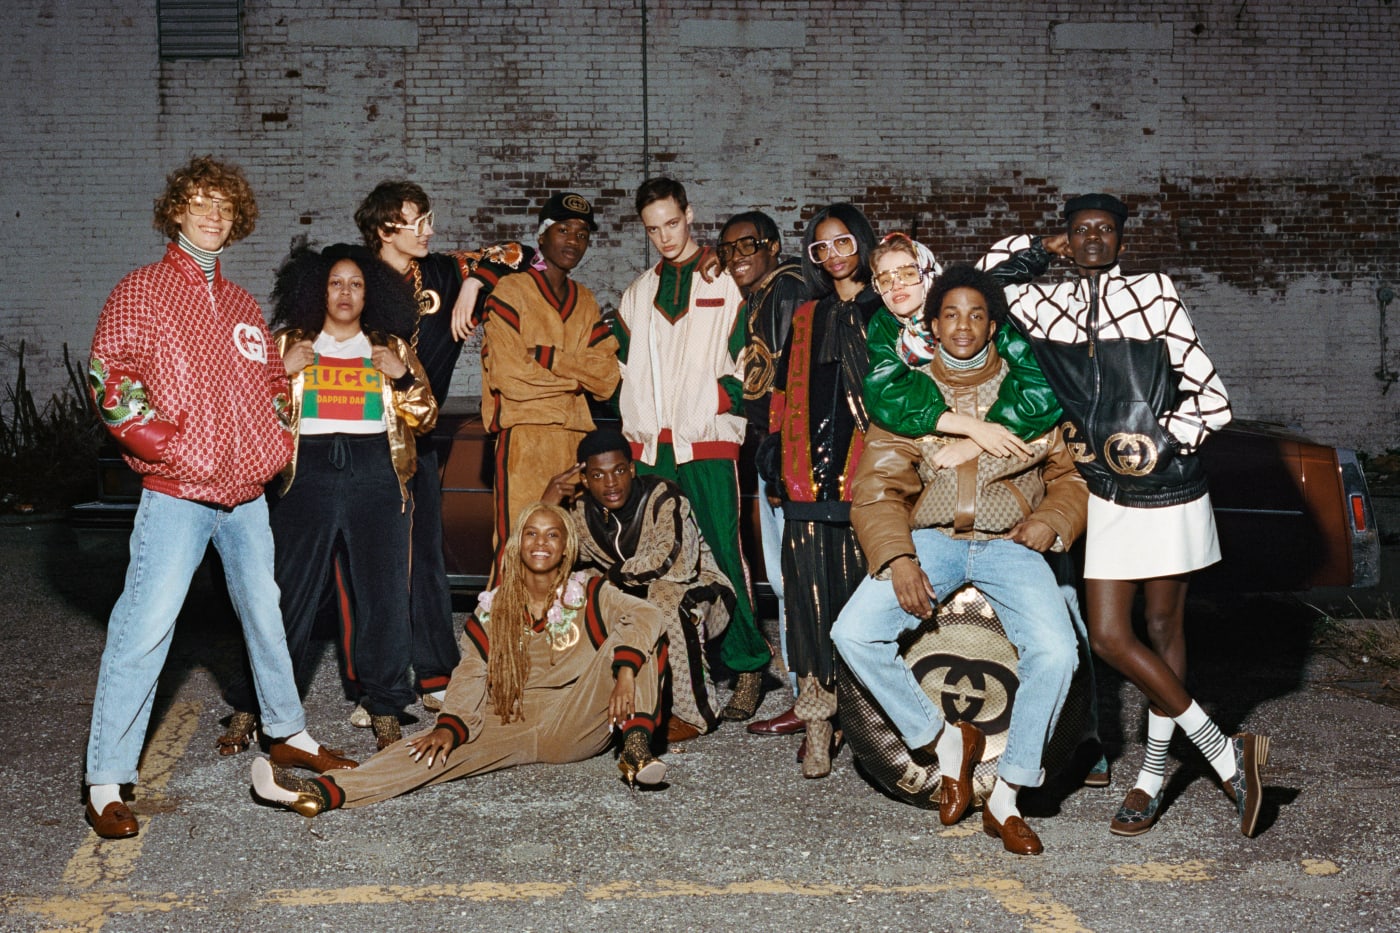 Gucci: How Desirable Is the Brand After Its Blackface Controversy? | Complex